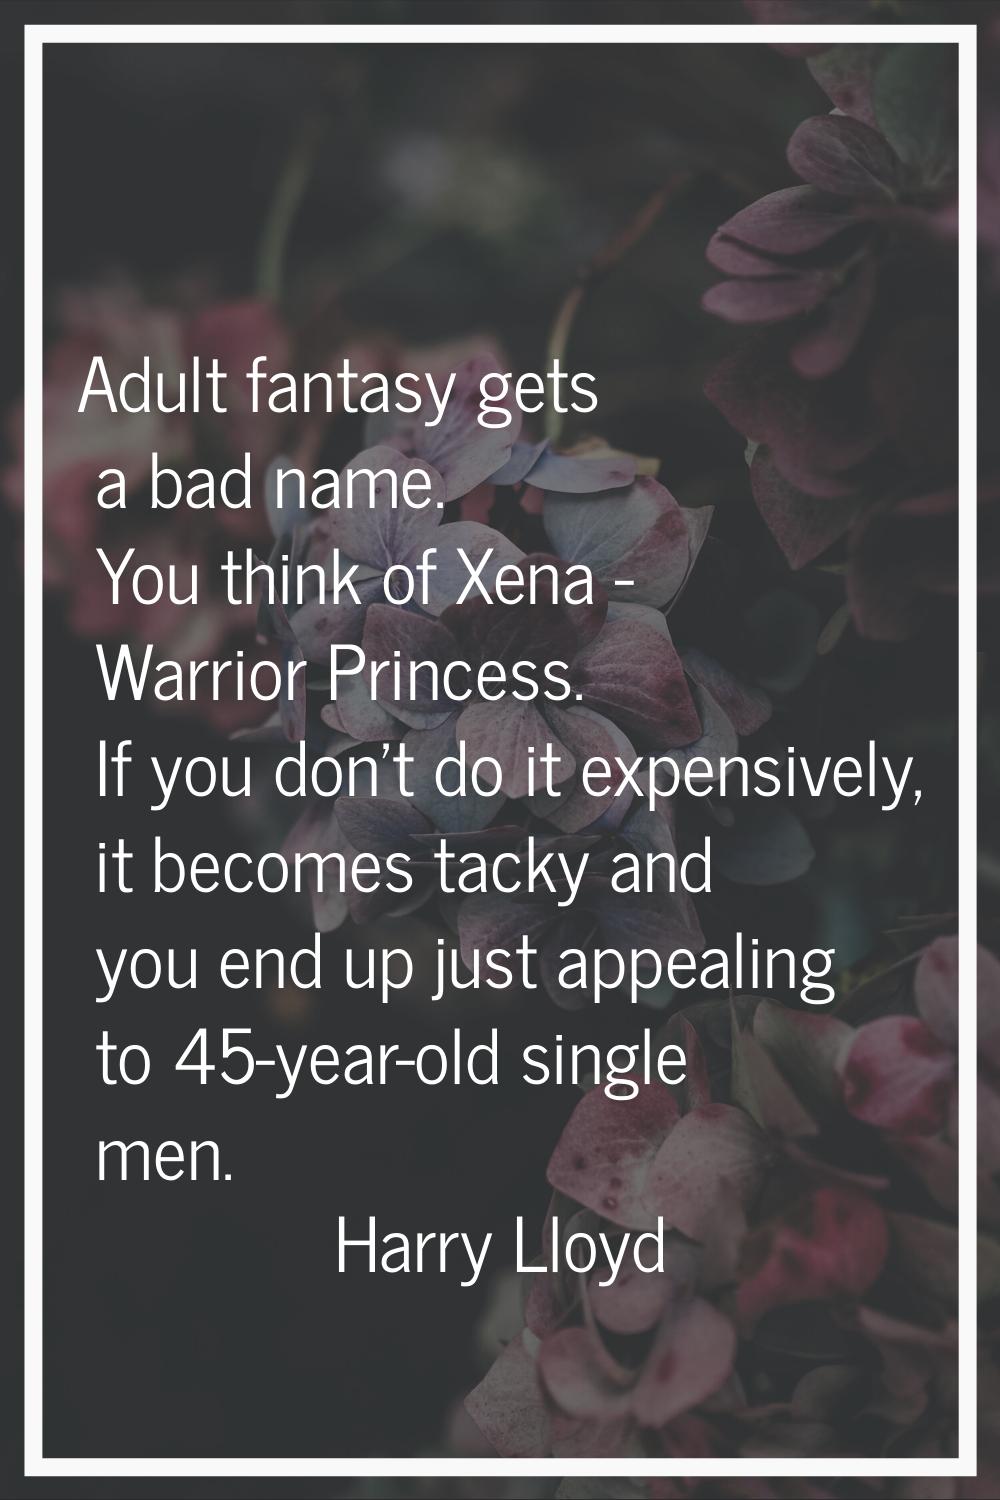 Adult fantasy gets a bad name. You think of Xena - Warrior Princess. If you don't do it expensively